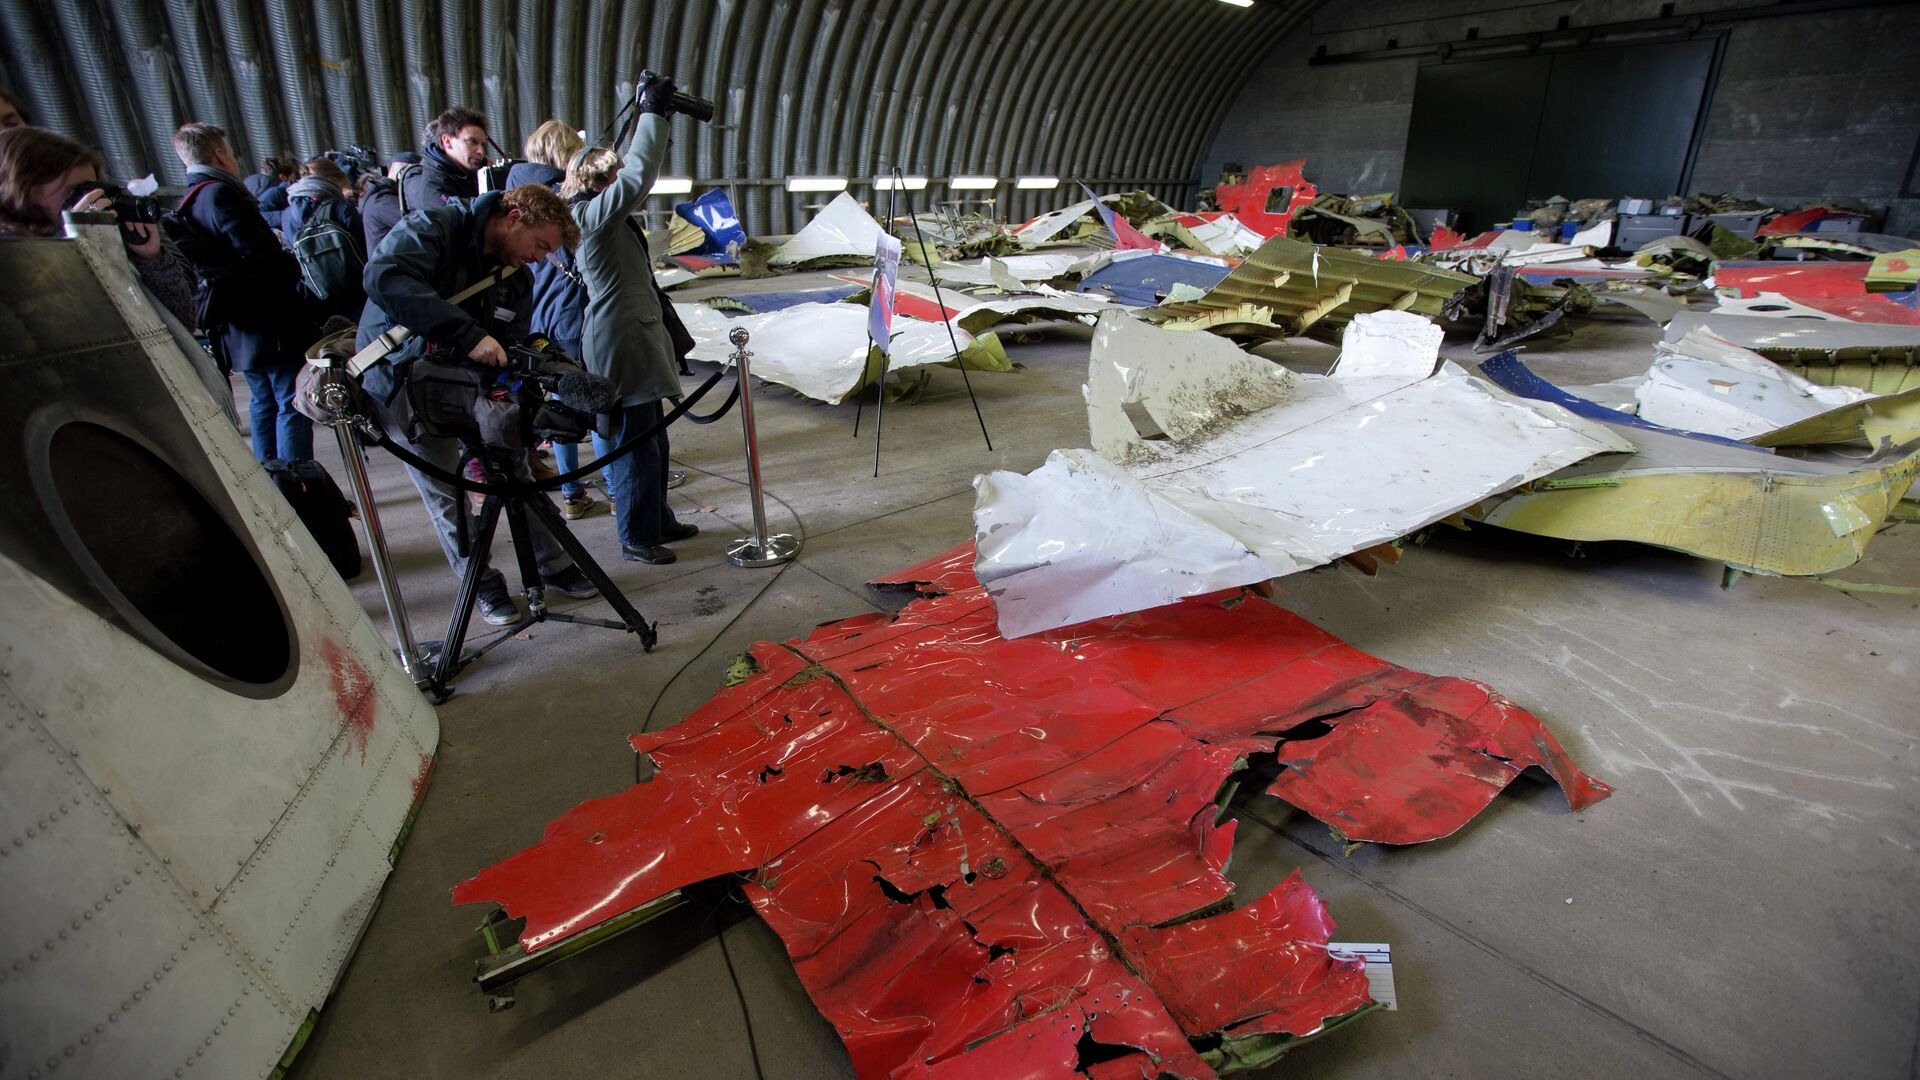 Journalists take images of parts of the wreckage of the Malaysia Airlines Flight 17 displayed in a hangar at Gilze Rijen airbase, Netherlands, Tuesday, March 3, 2015 - Sputnik International, 1920, 17.11.2022